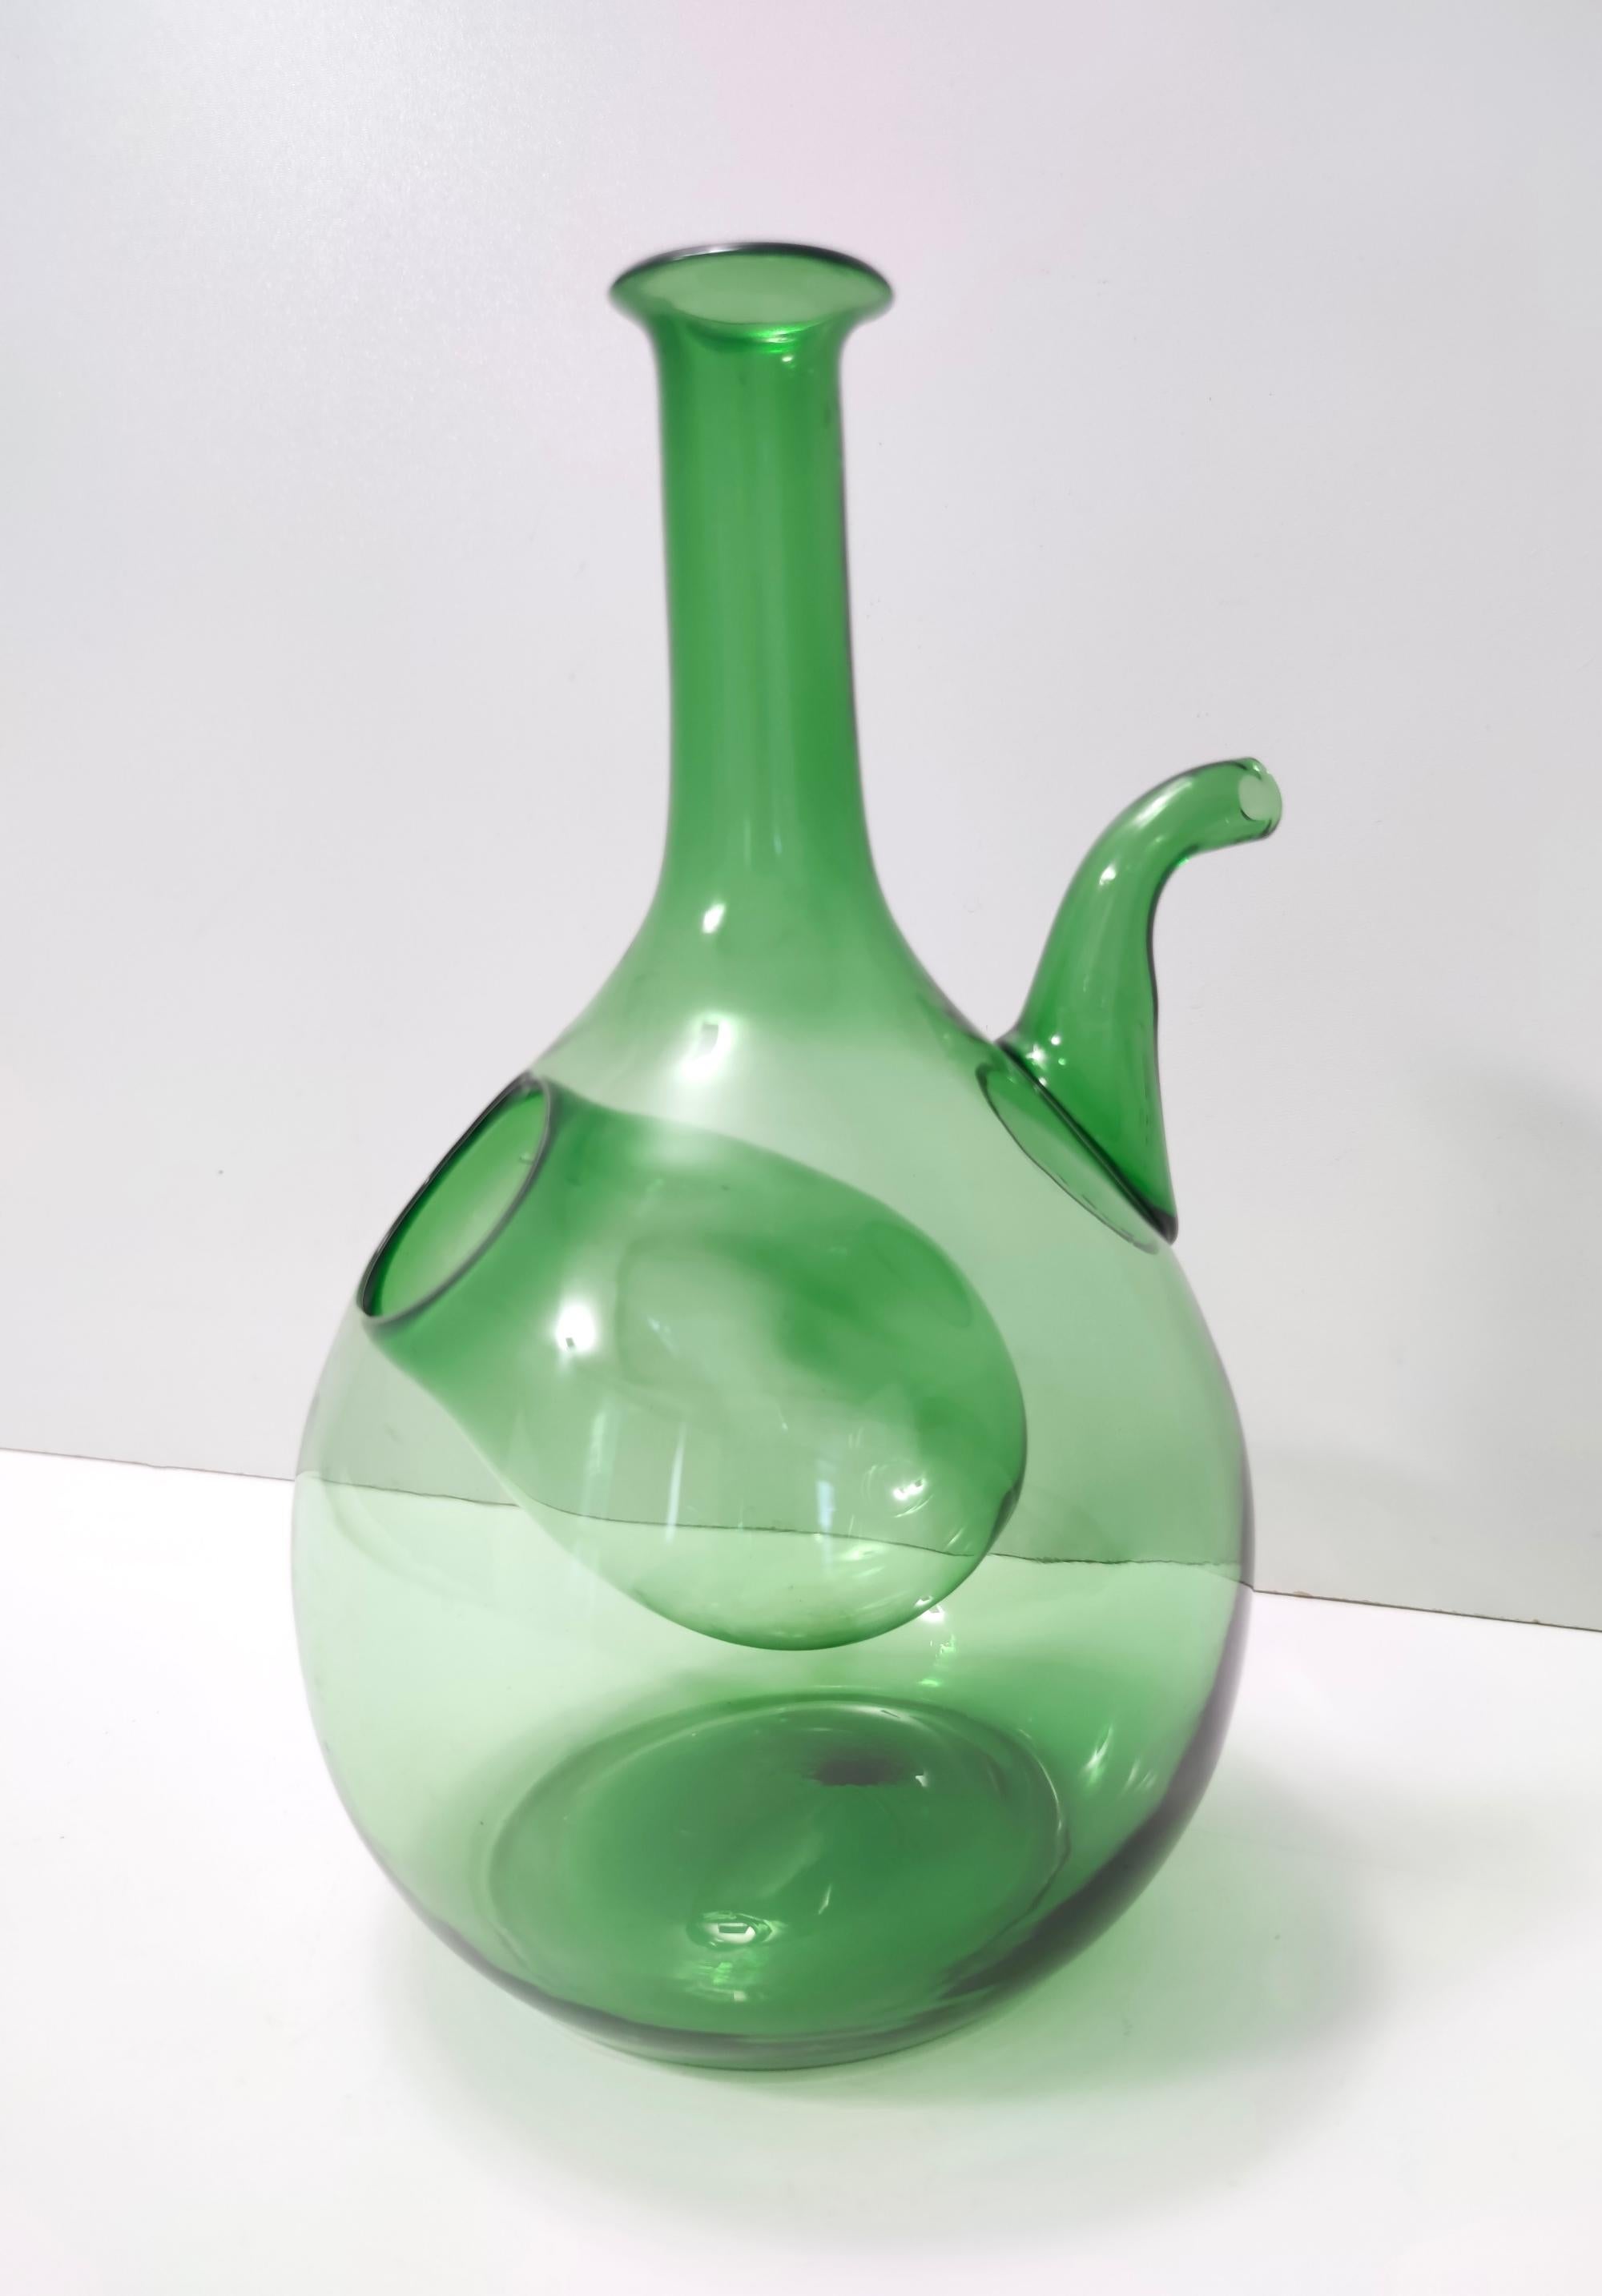 Italian Vintage Green Blown Glass Jug with Ice Bucket Included, Empoli, Italy